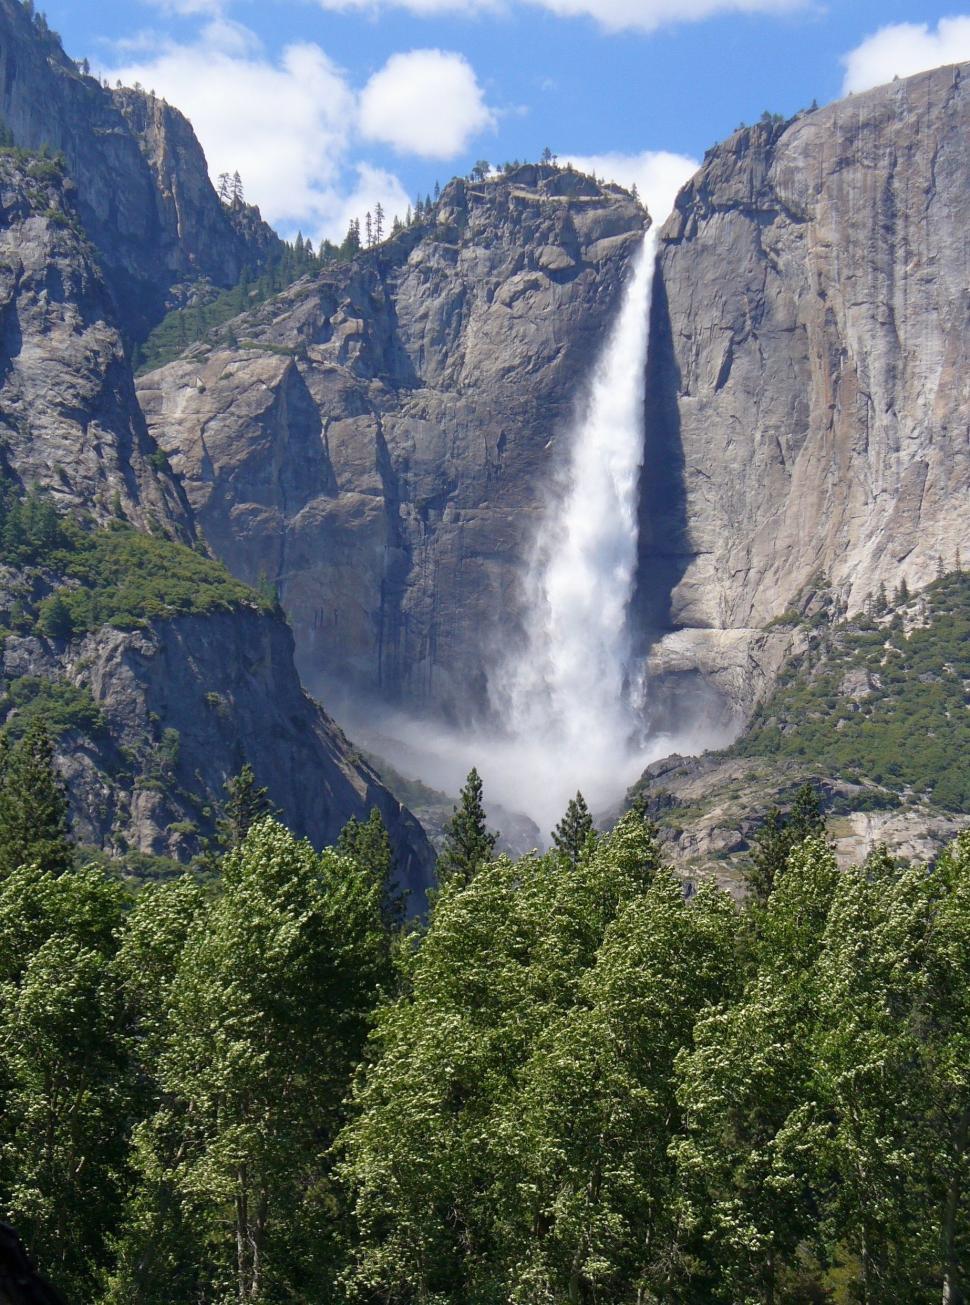 Free Image of Large Waterfall Cascading Down Mountain Side 